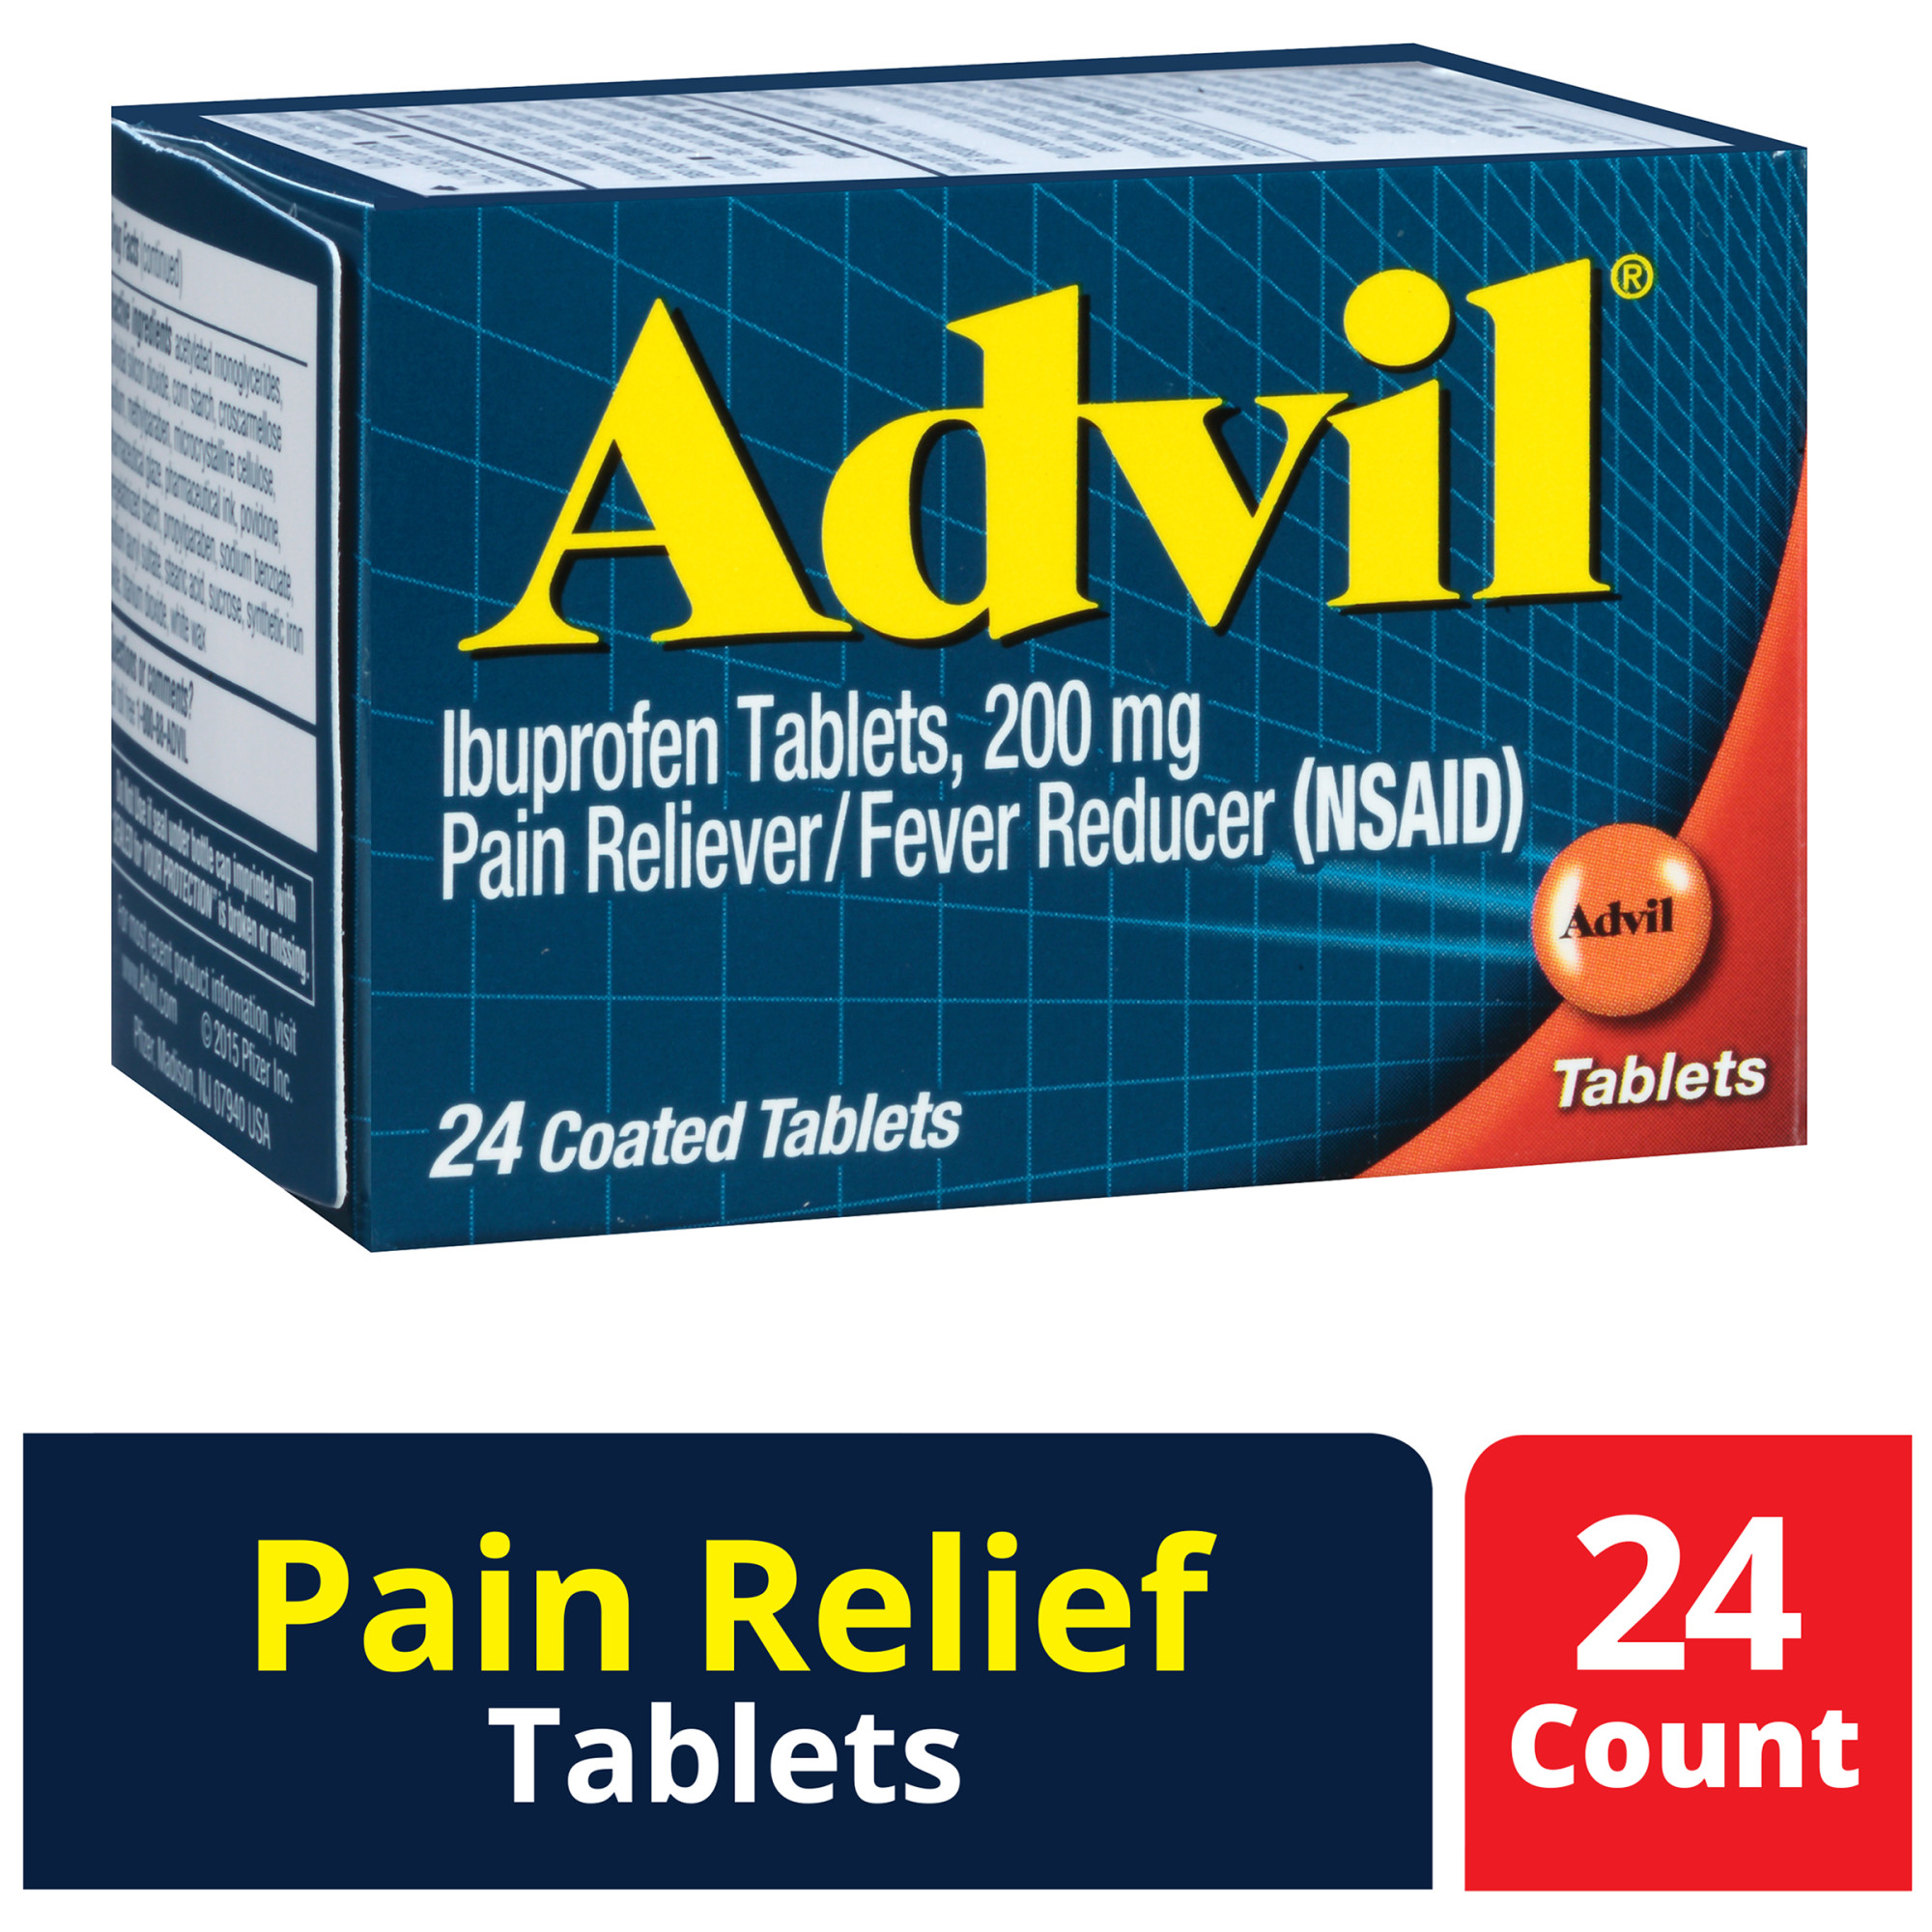 Advil Pain Relievers and Fever Reducer Coated Tablets, 200 Mg Ibuprofen, 24 Count - image 1 of 8